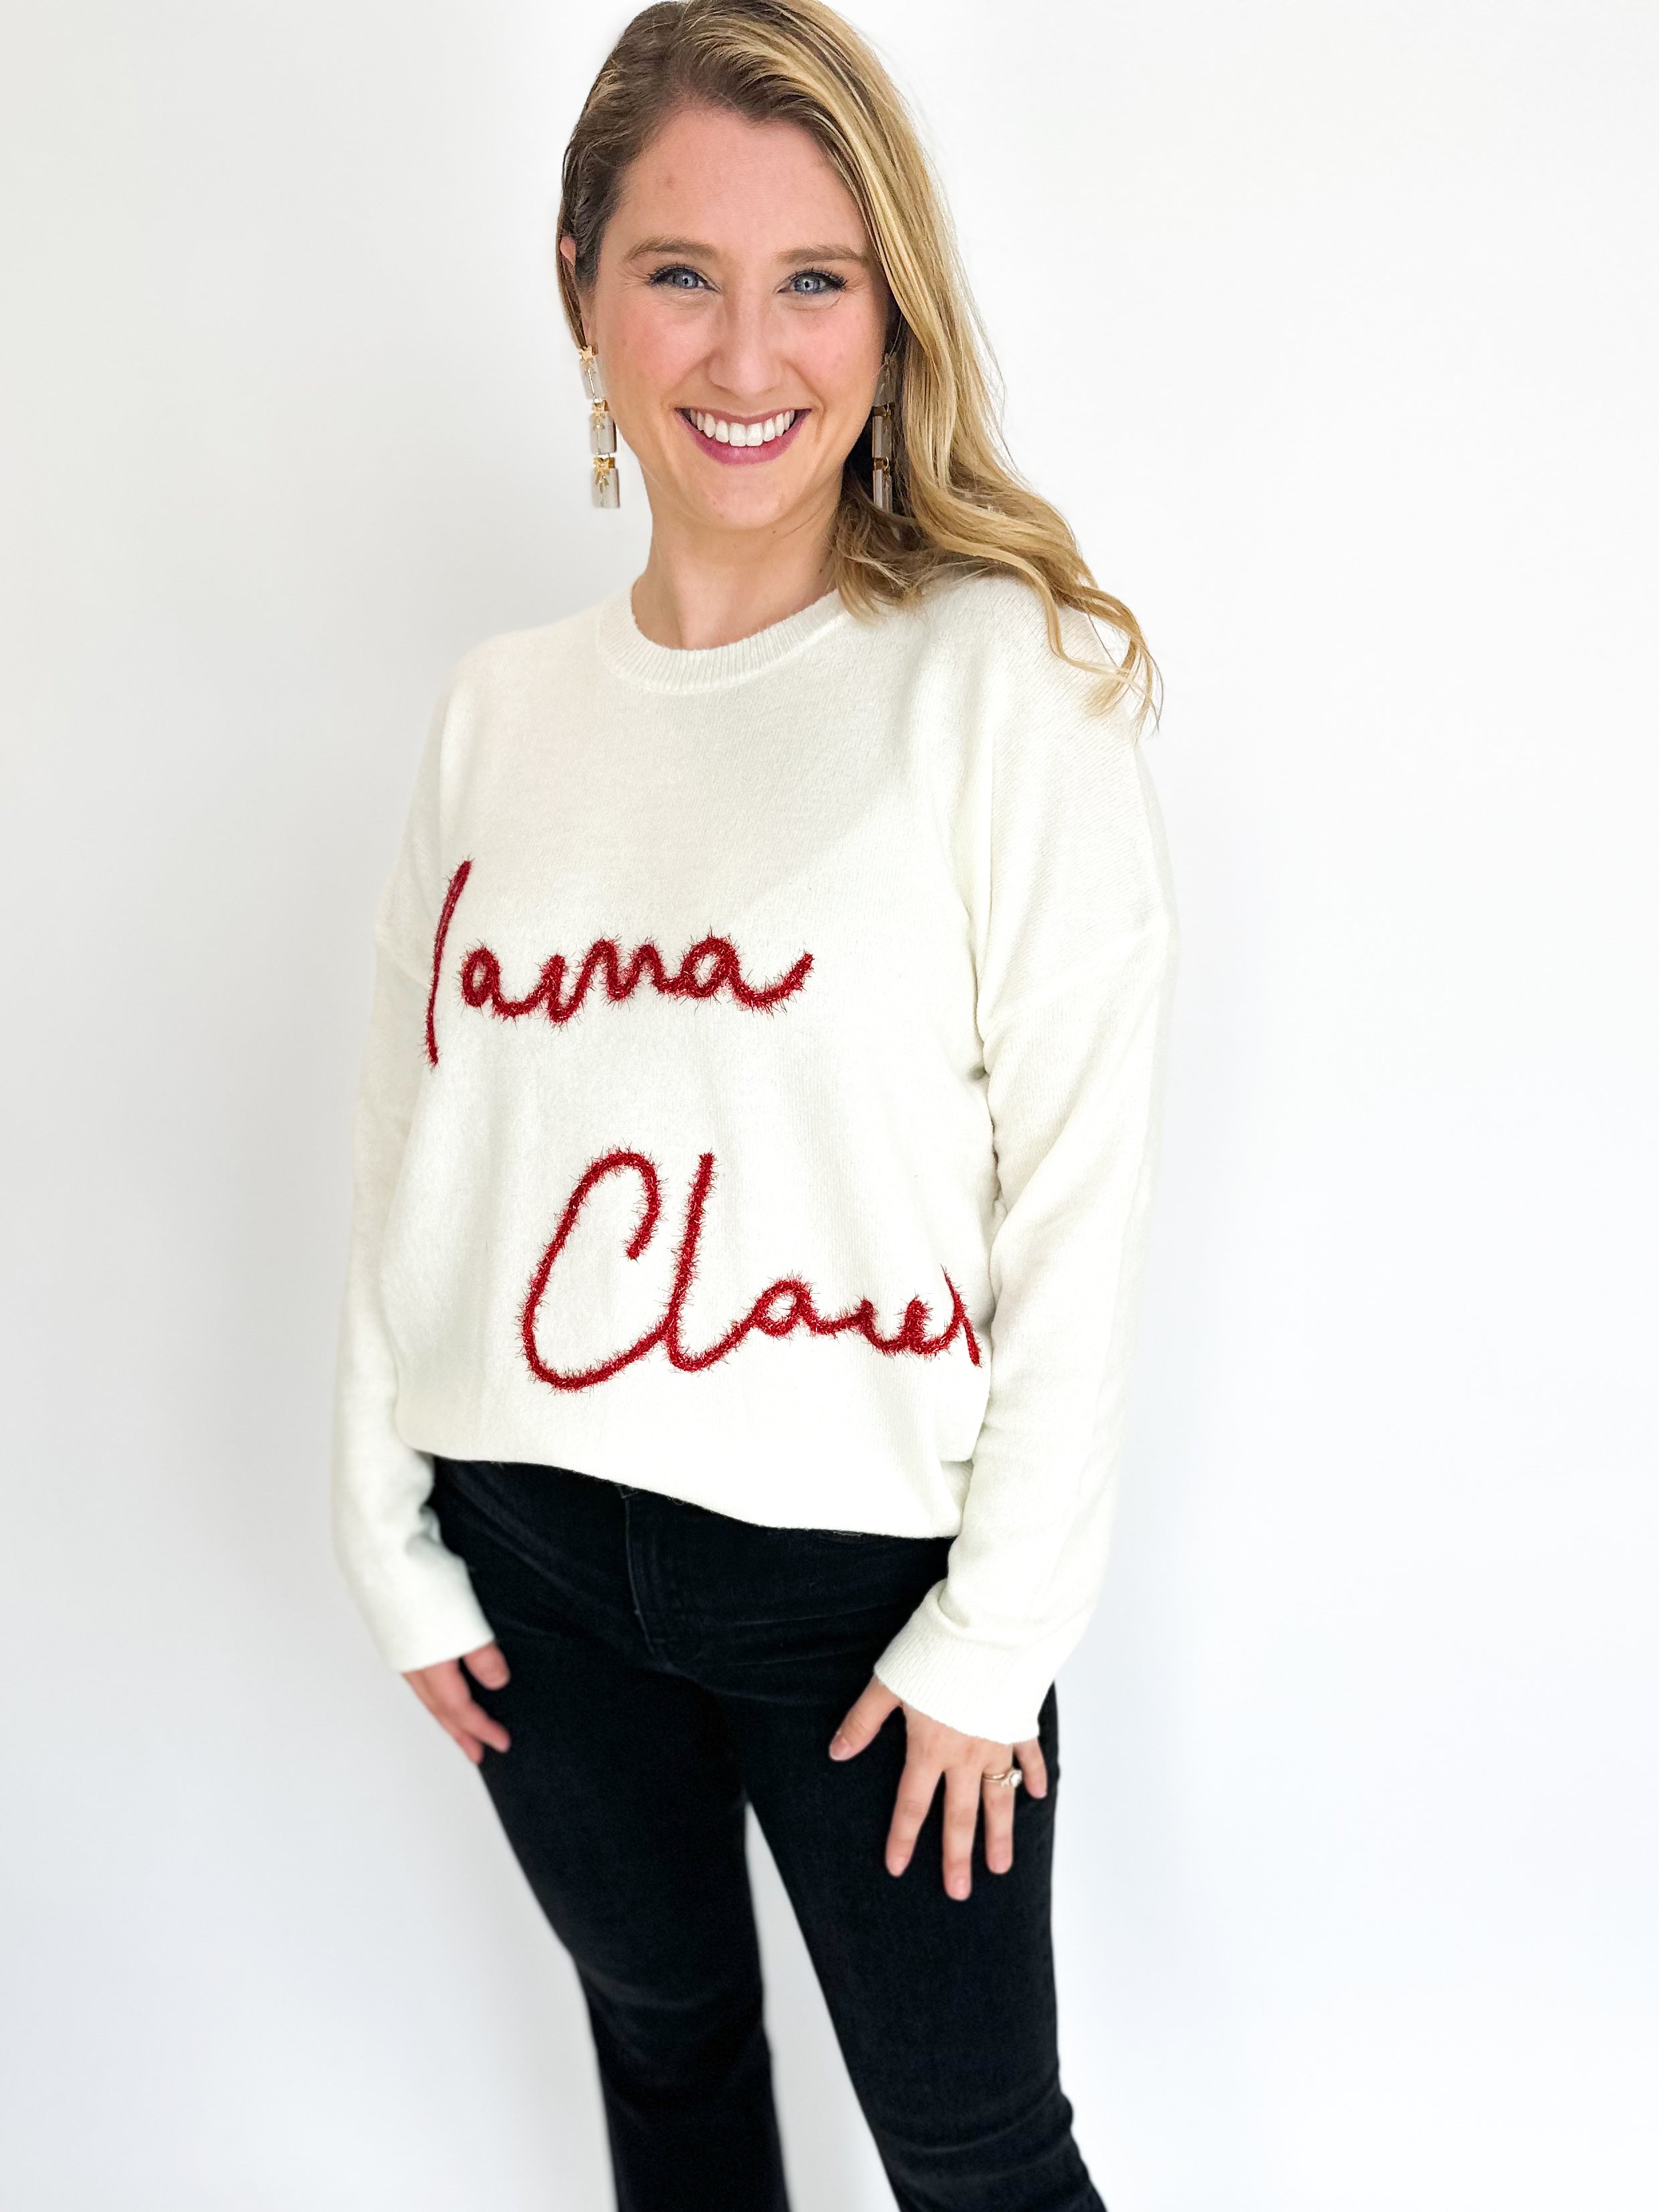 Mama Claus Sweater Top-230 Sweaters/Cardis-GILLI CLOTHING-July & June Women's Fashion Boutique Located in San Antonio, Texas